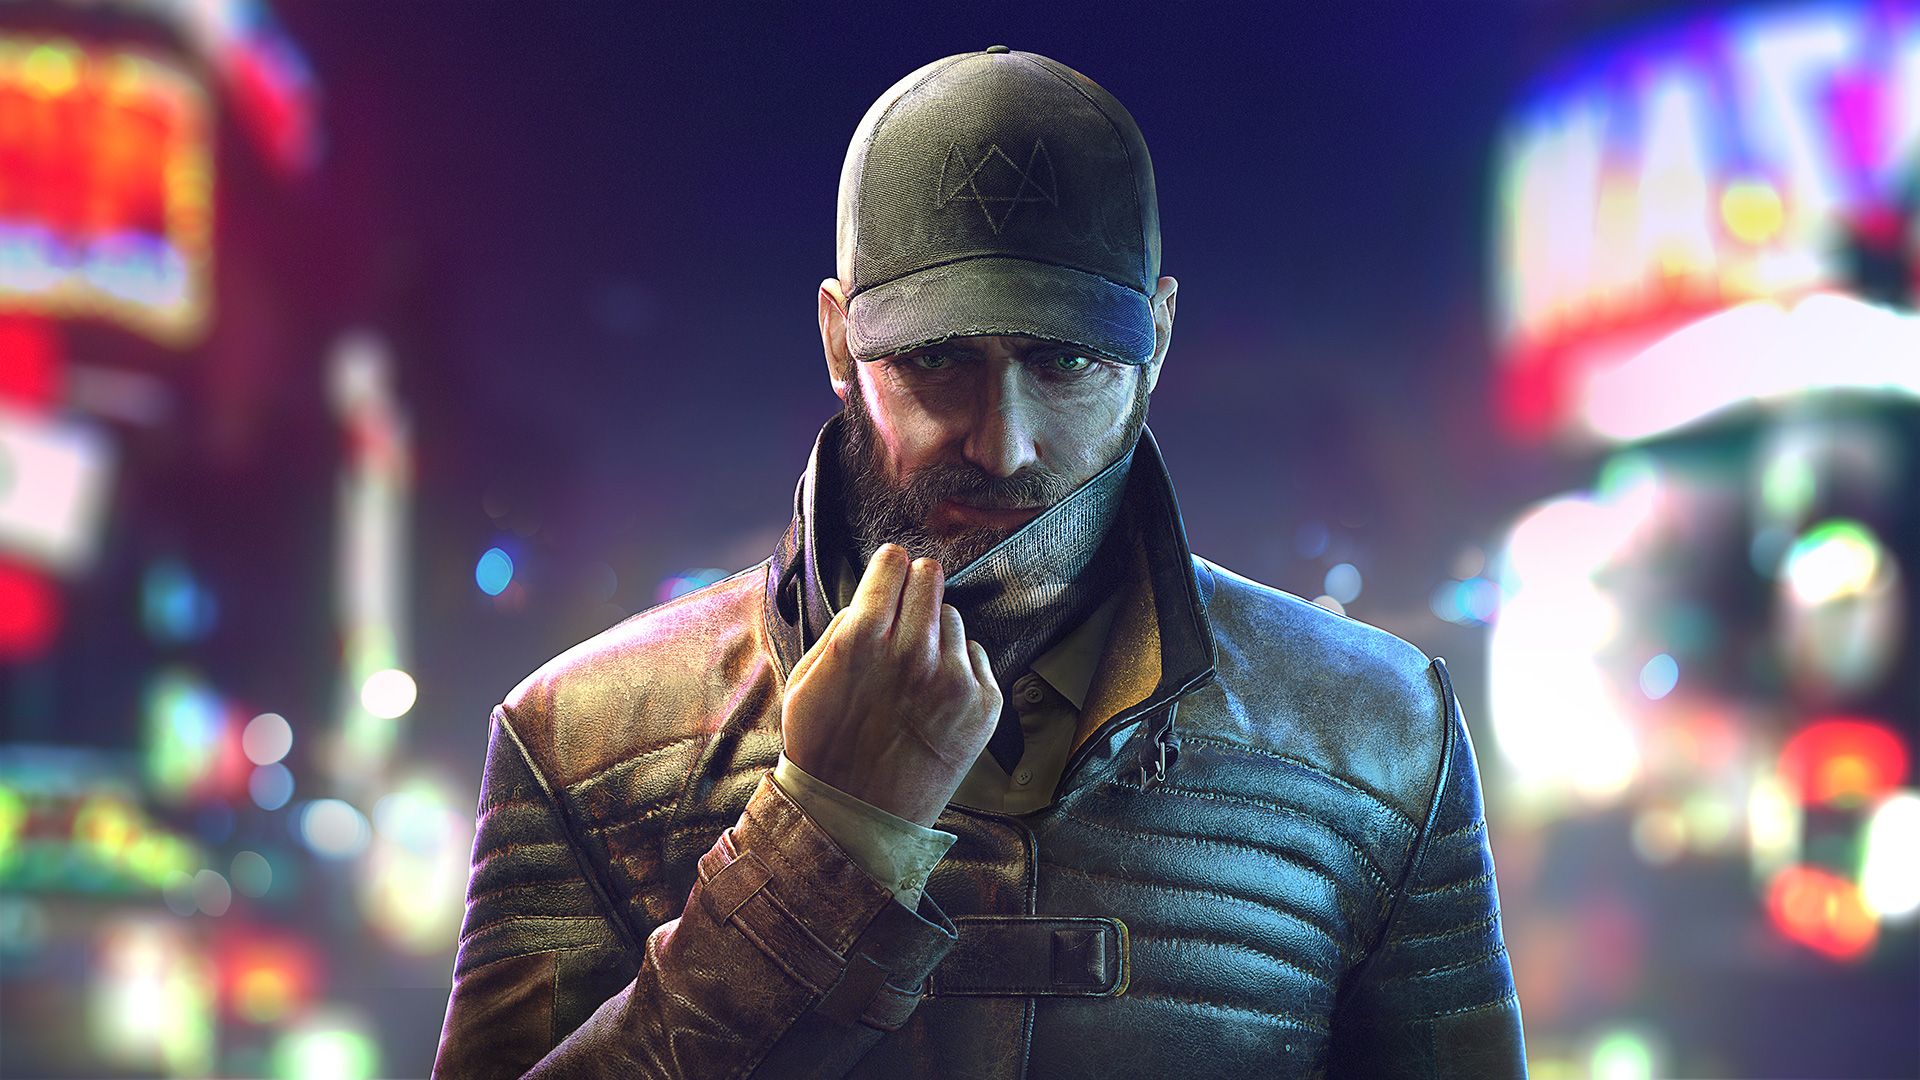 watch dogs, aiden pearce, watch dogs: legion, video game